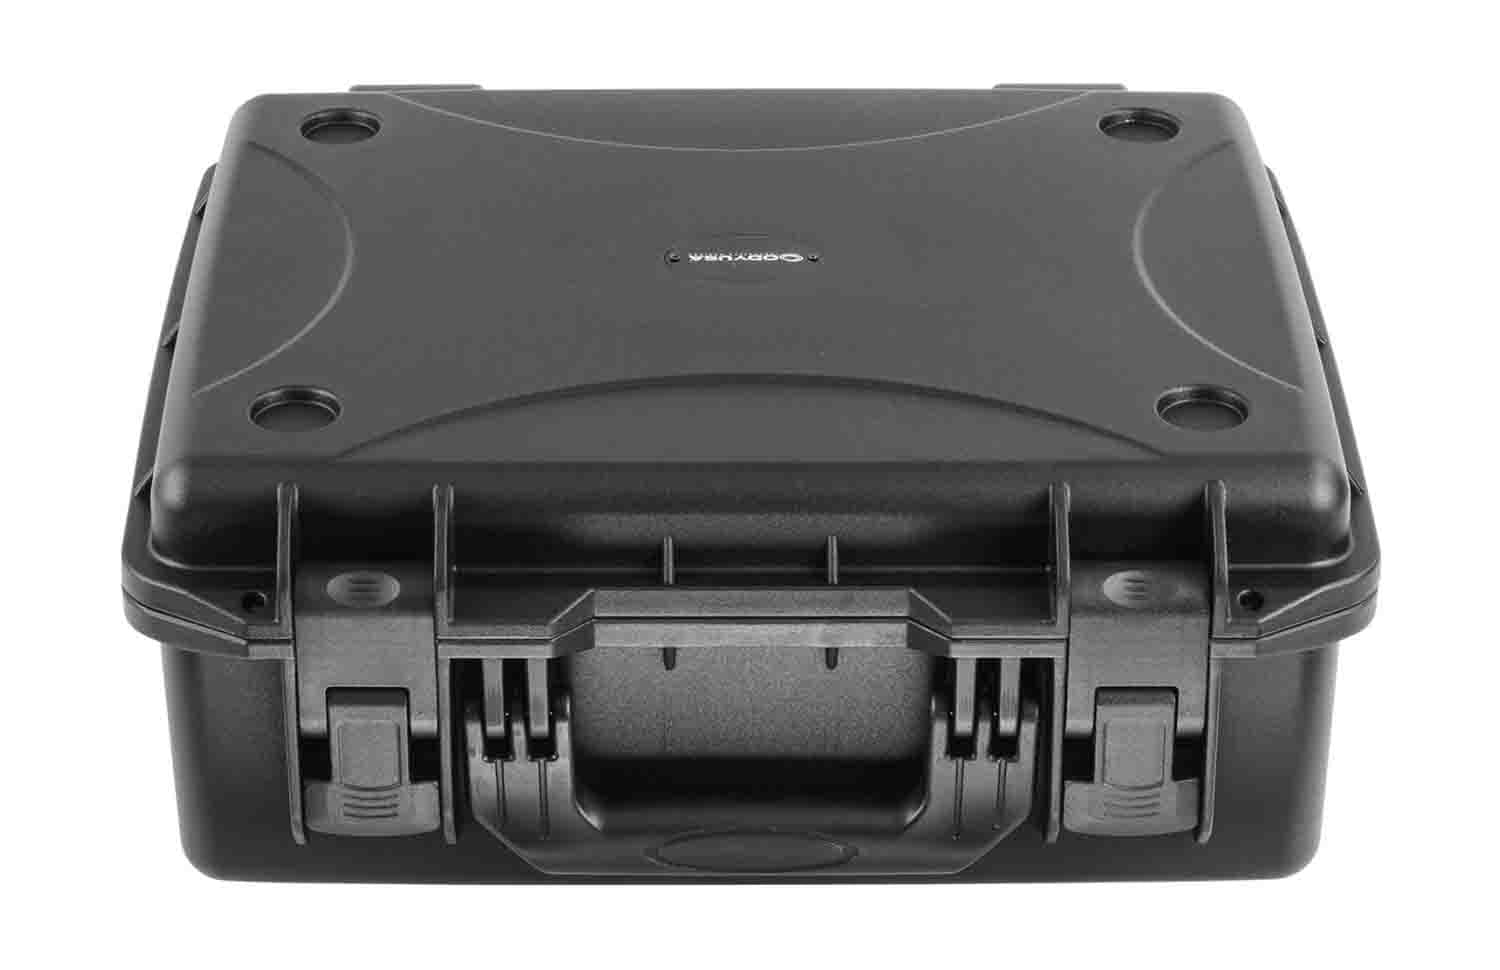 Odyssey VU161306 Vulcan Injection-Molded Utility Case with Pluck Foam - 17 x 13 x 5" Interior - Hollywood DJ